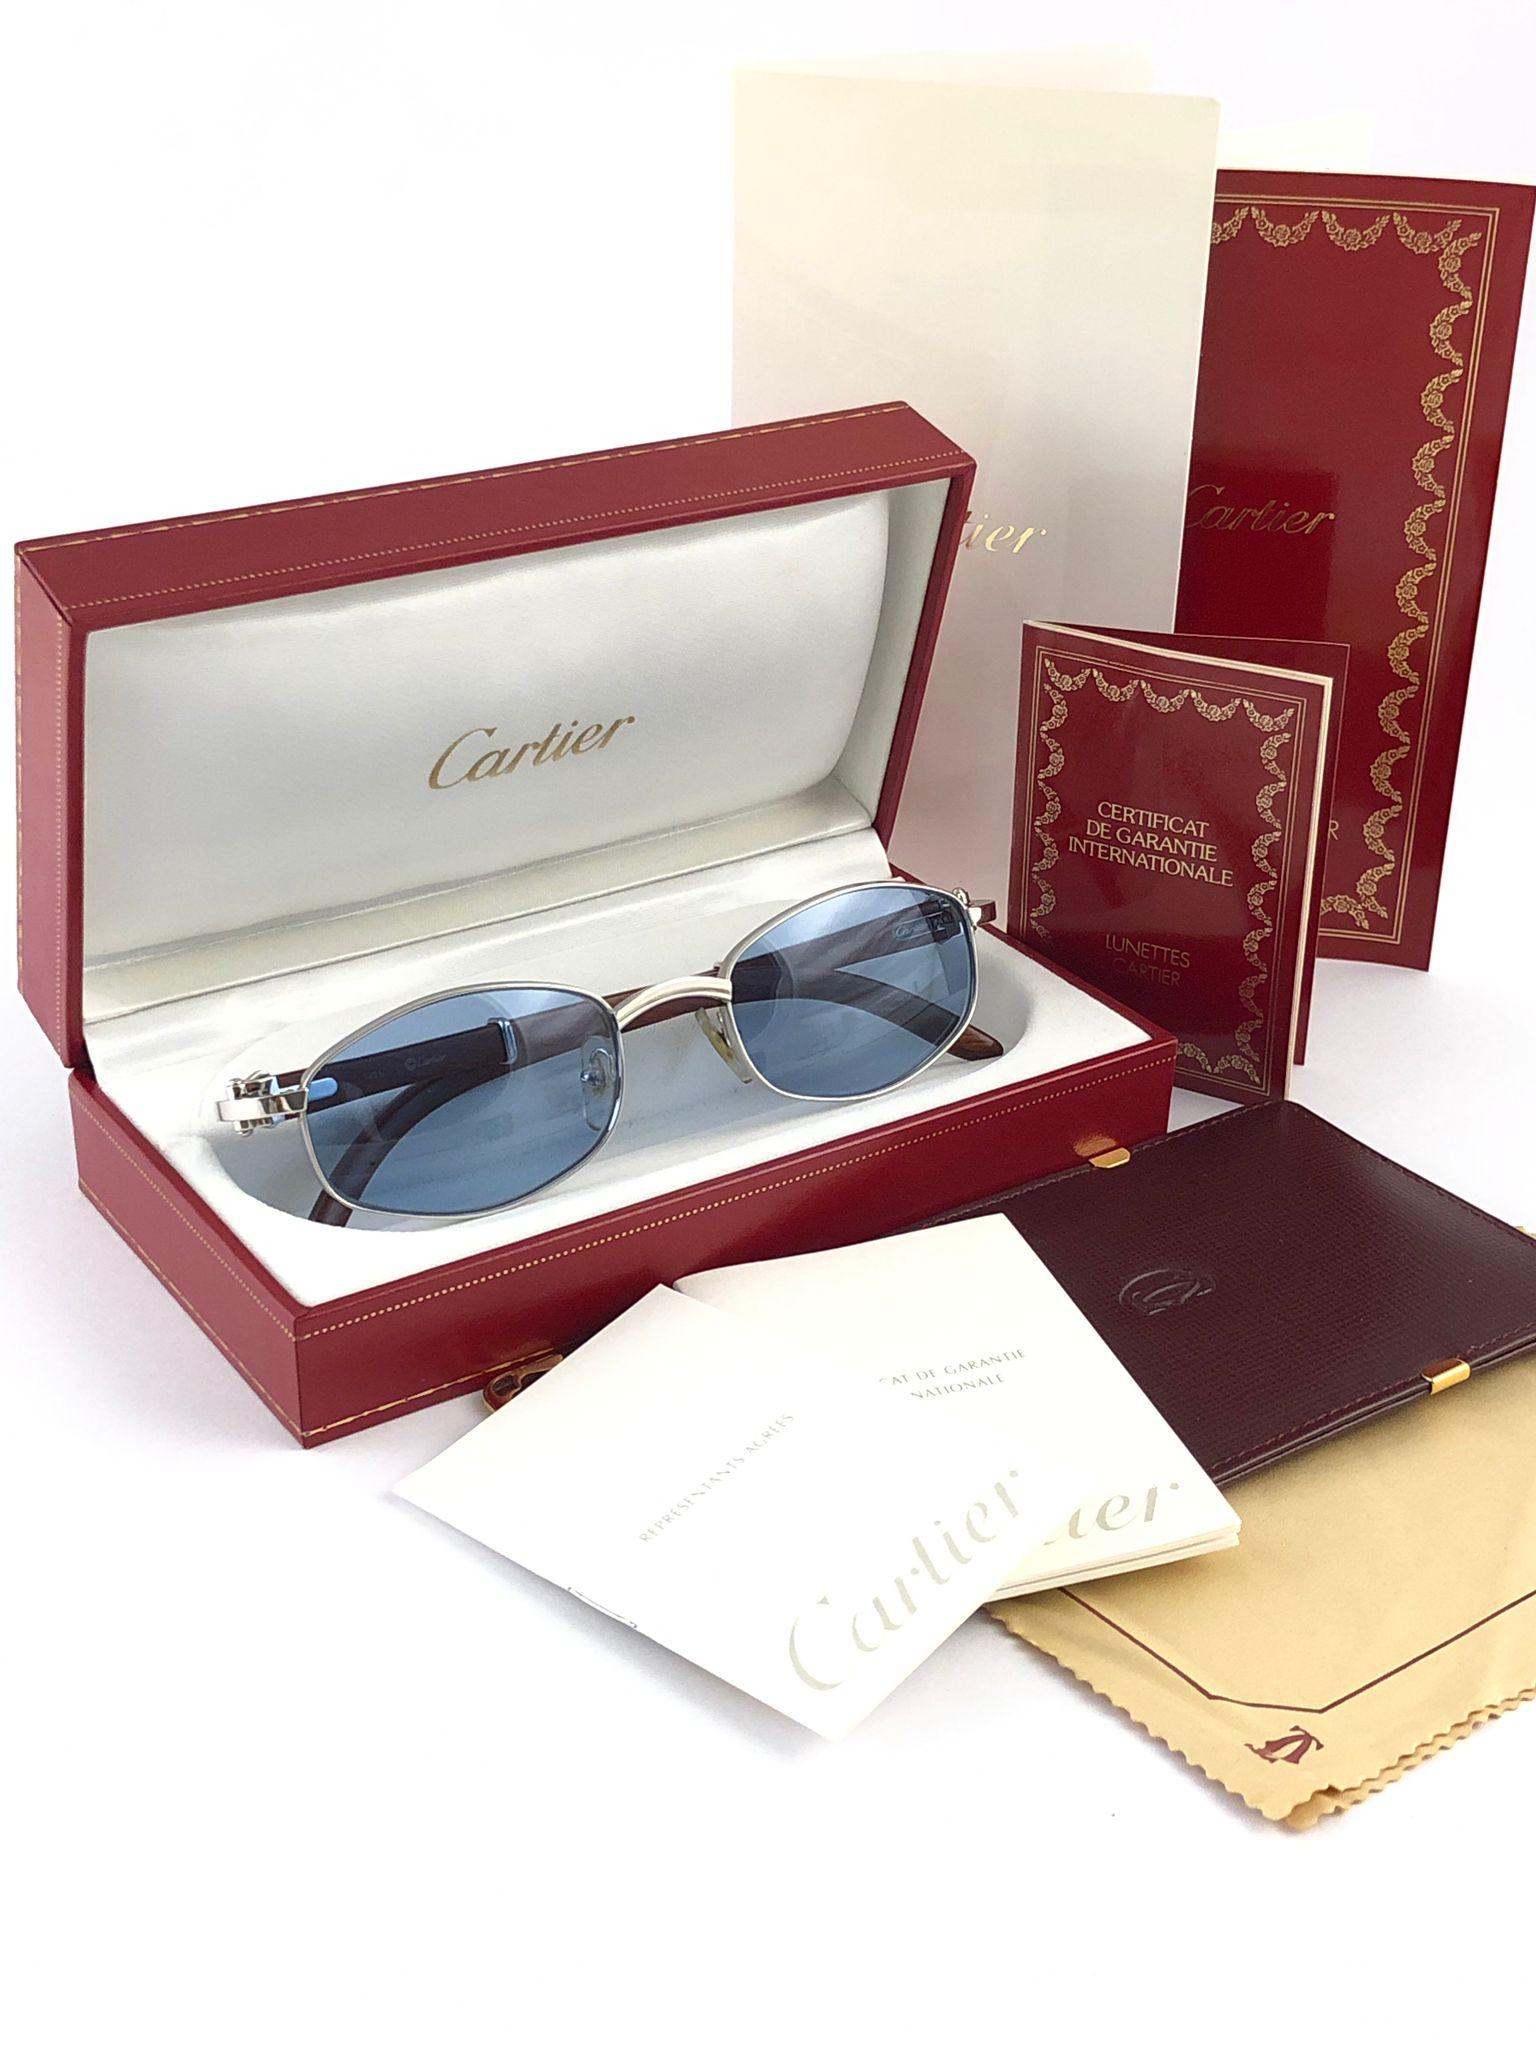 New 1990 Cartier Full Set Cartayat Hardwood Sunglasses with new light blue  (uv protection) lenses. 
Frame is with the front and sides in white gold and has the famous wood & gold accents temples. 
Amazing craftsmanship! All hallmarks. Both arms